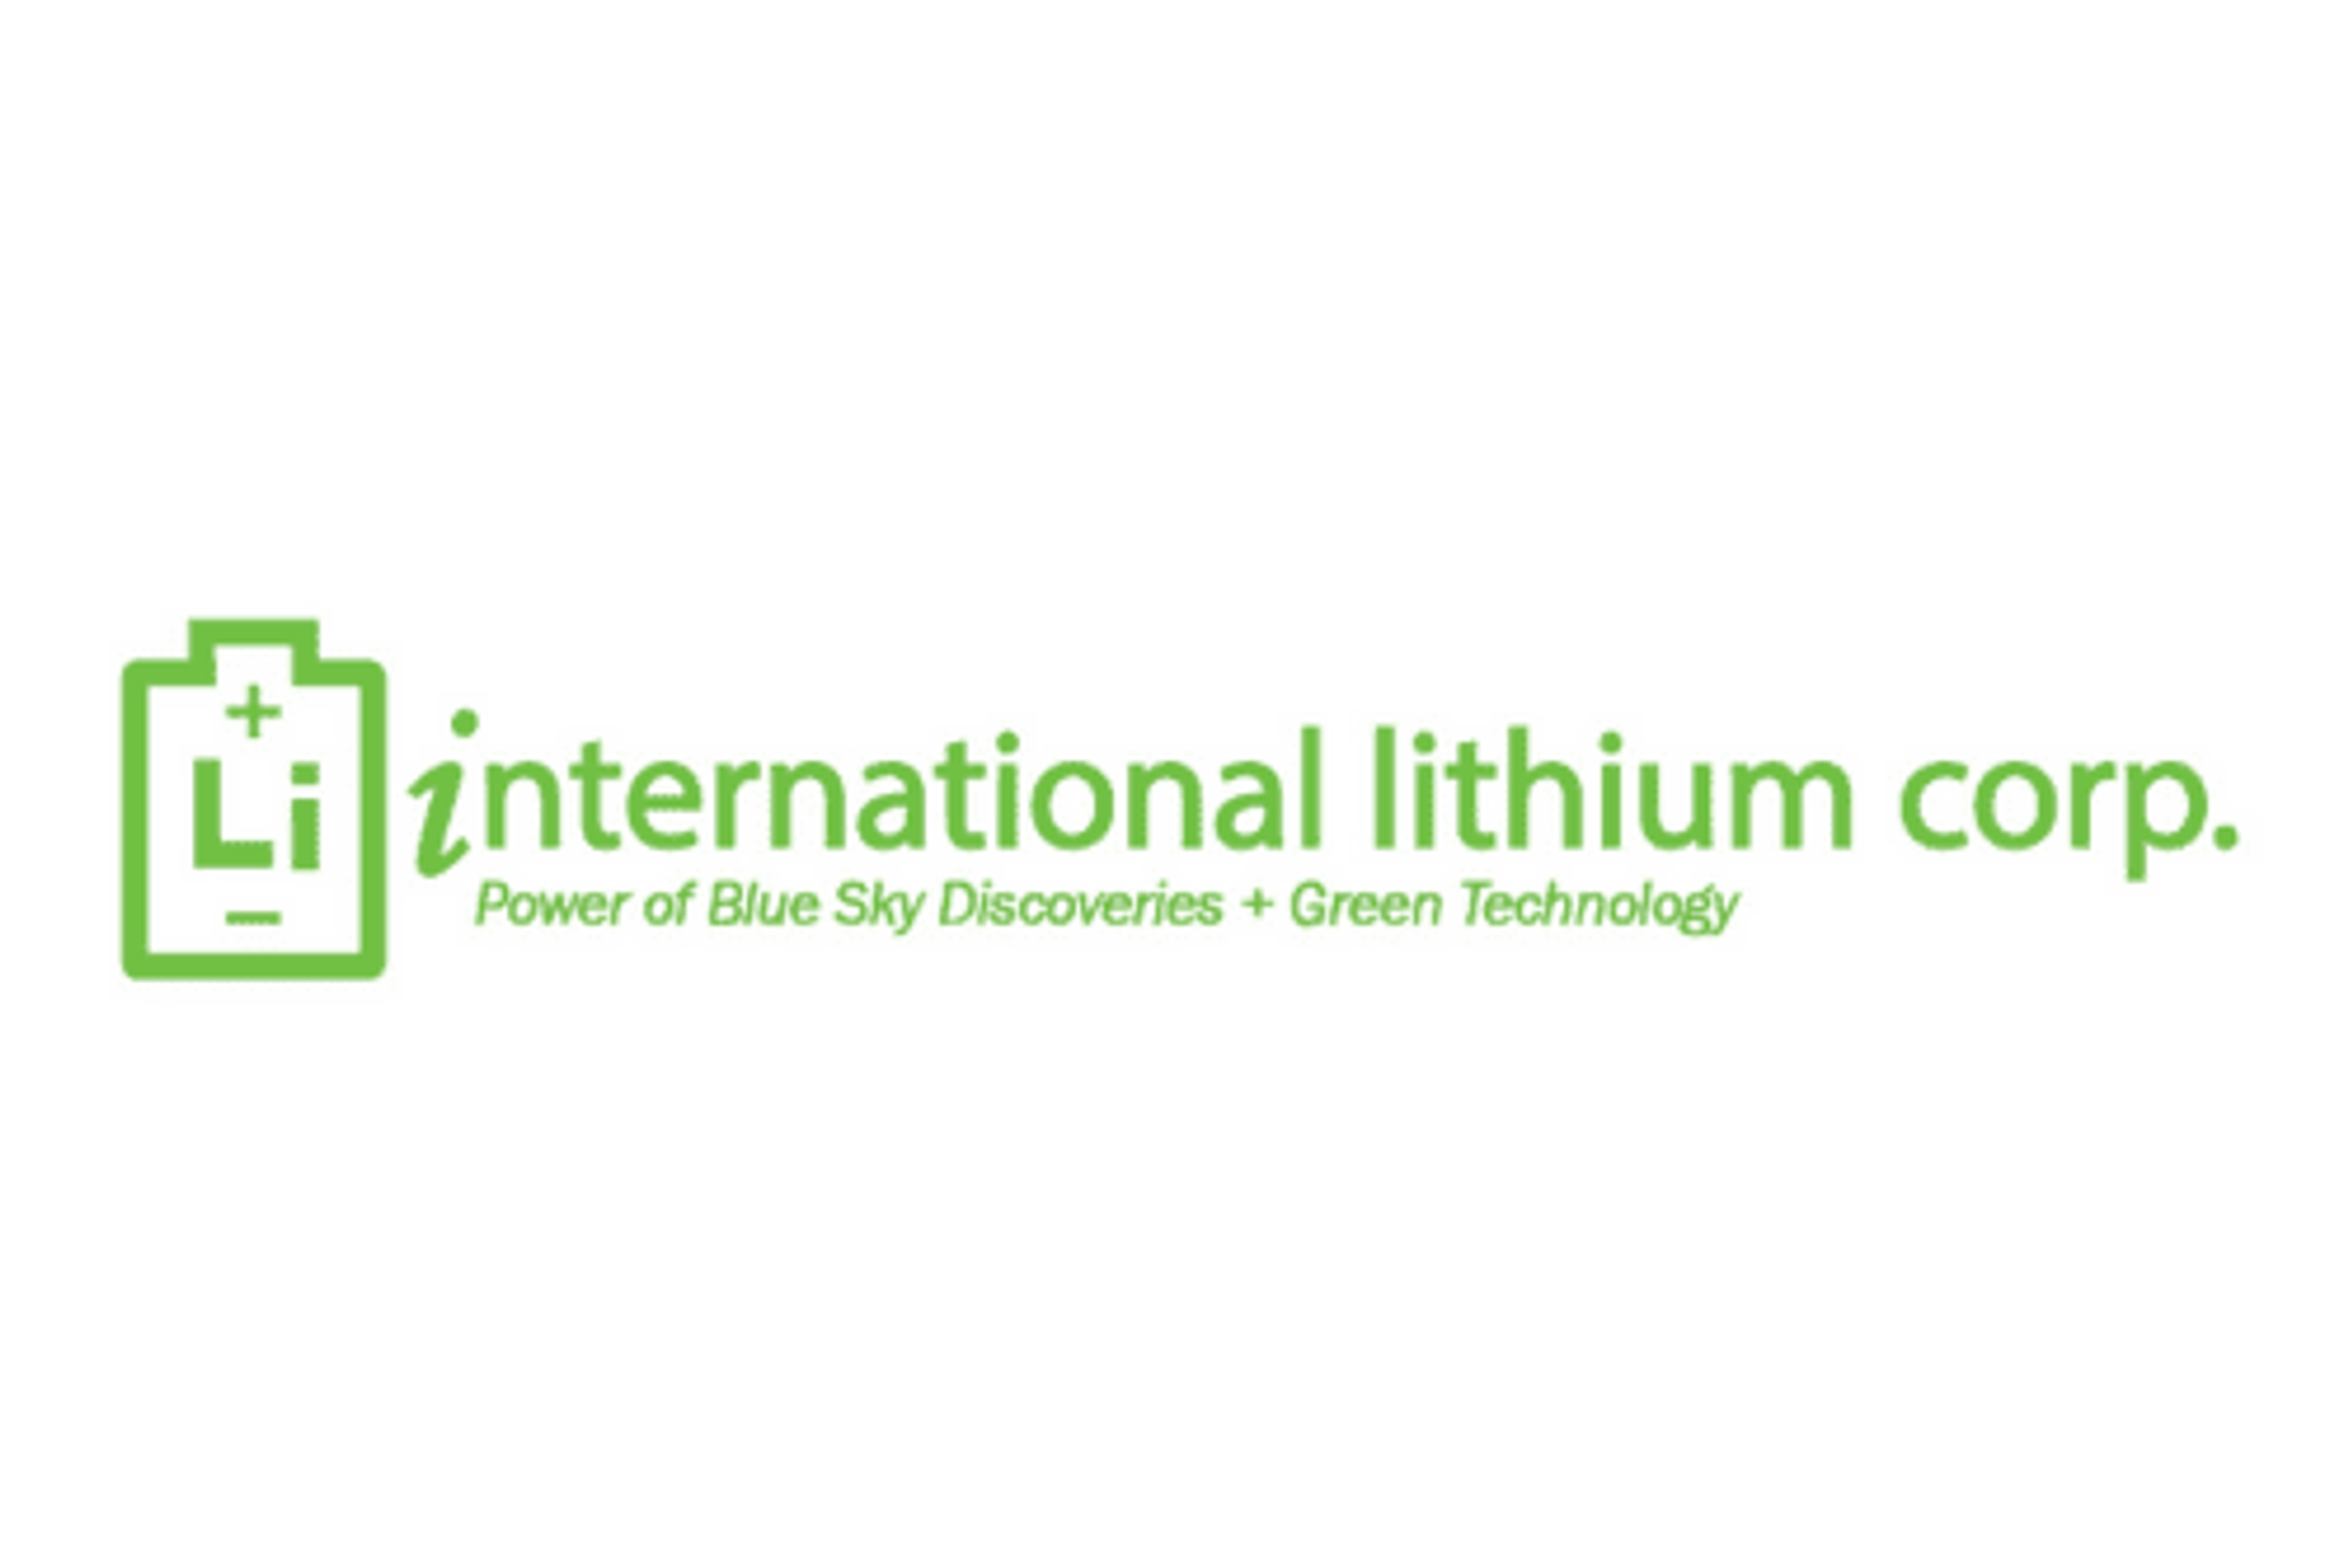 International Lithium Corp. Announces Passing of Director